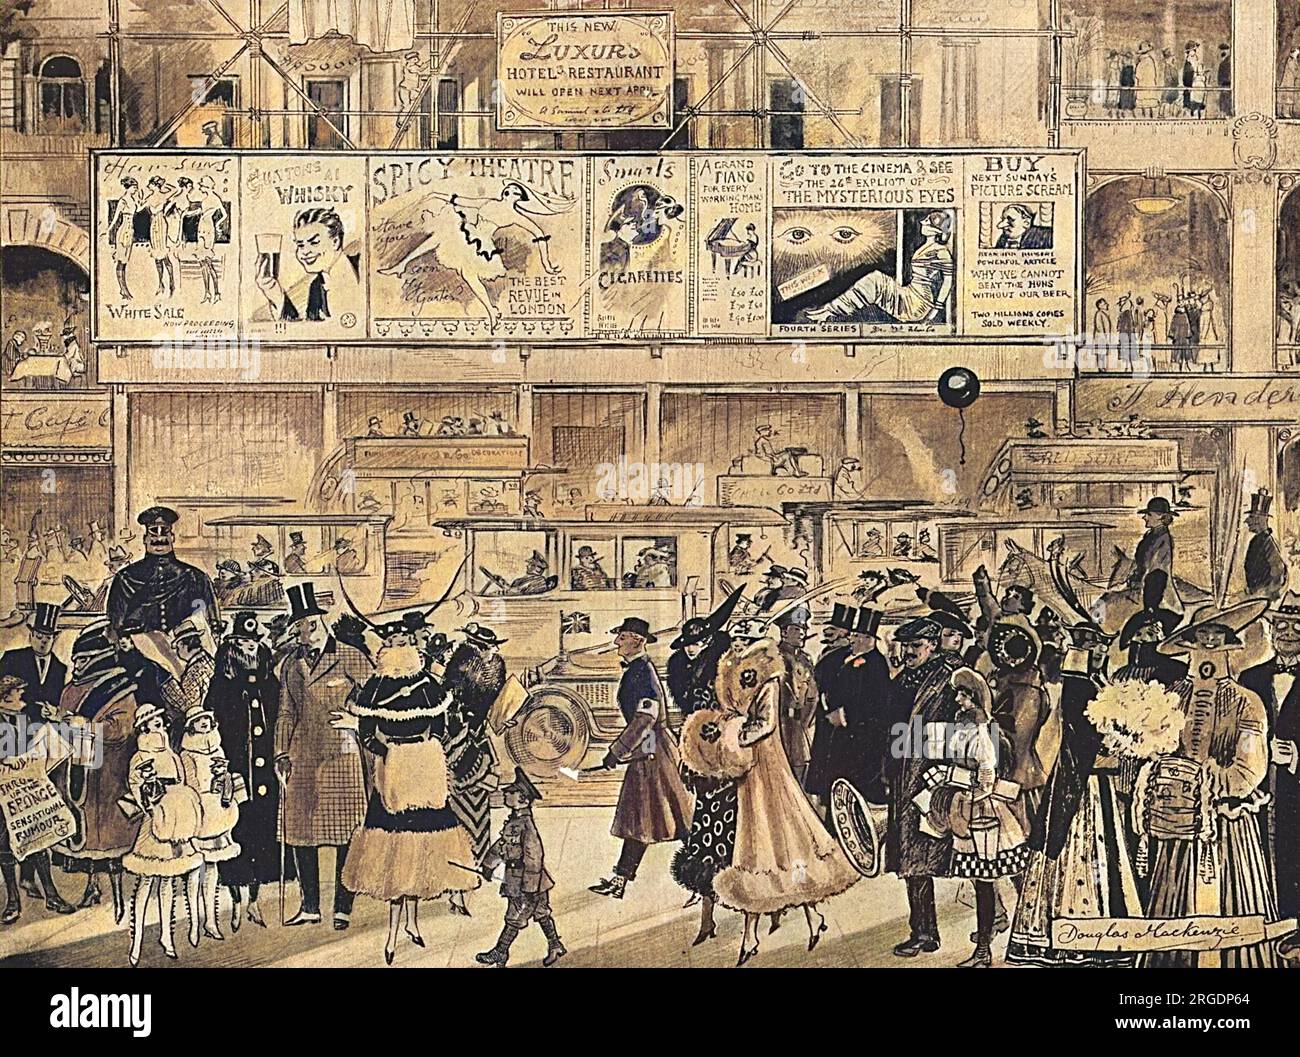 Illustration showing the mass of entertainment and amusements on offer to the London population during the First World War, despite the fact the country was supposed to be practising war economy.  Cars and taxis fill the streets, people are well dressed and posters advertise clothing sales, drink, film and theatre shows. Stock Photo